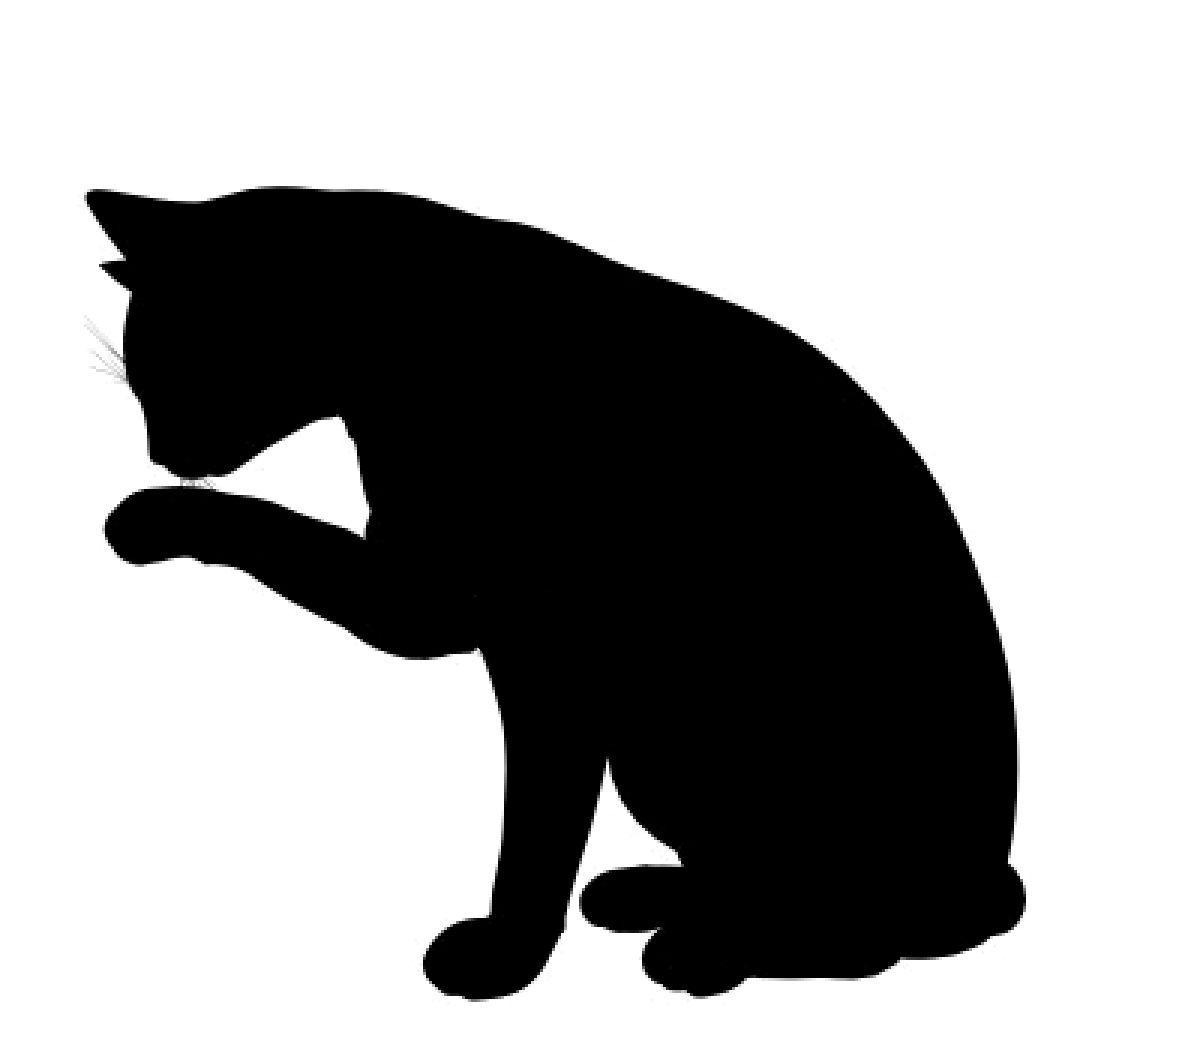 Download 5682512-black-cat-art-illustration-silhouette-on-a-white ...